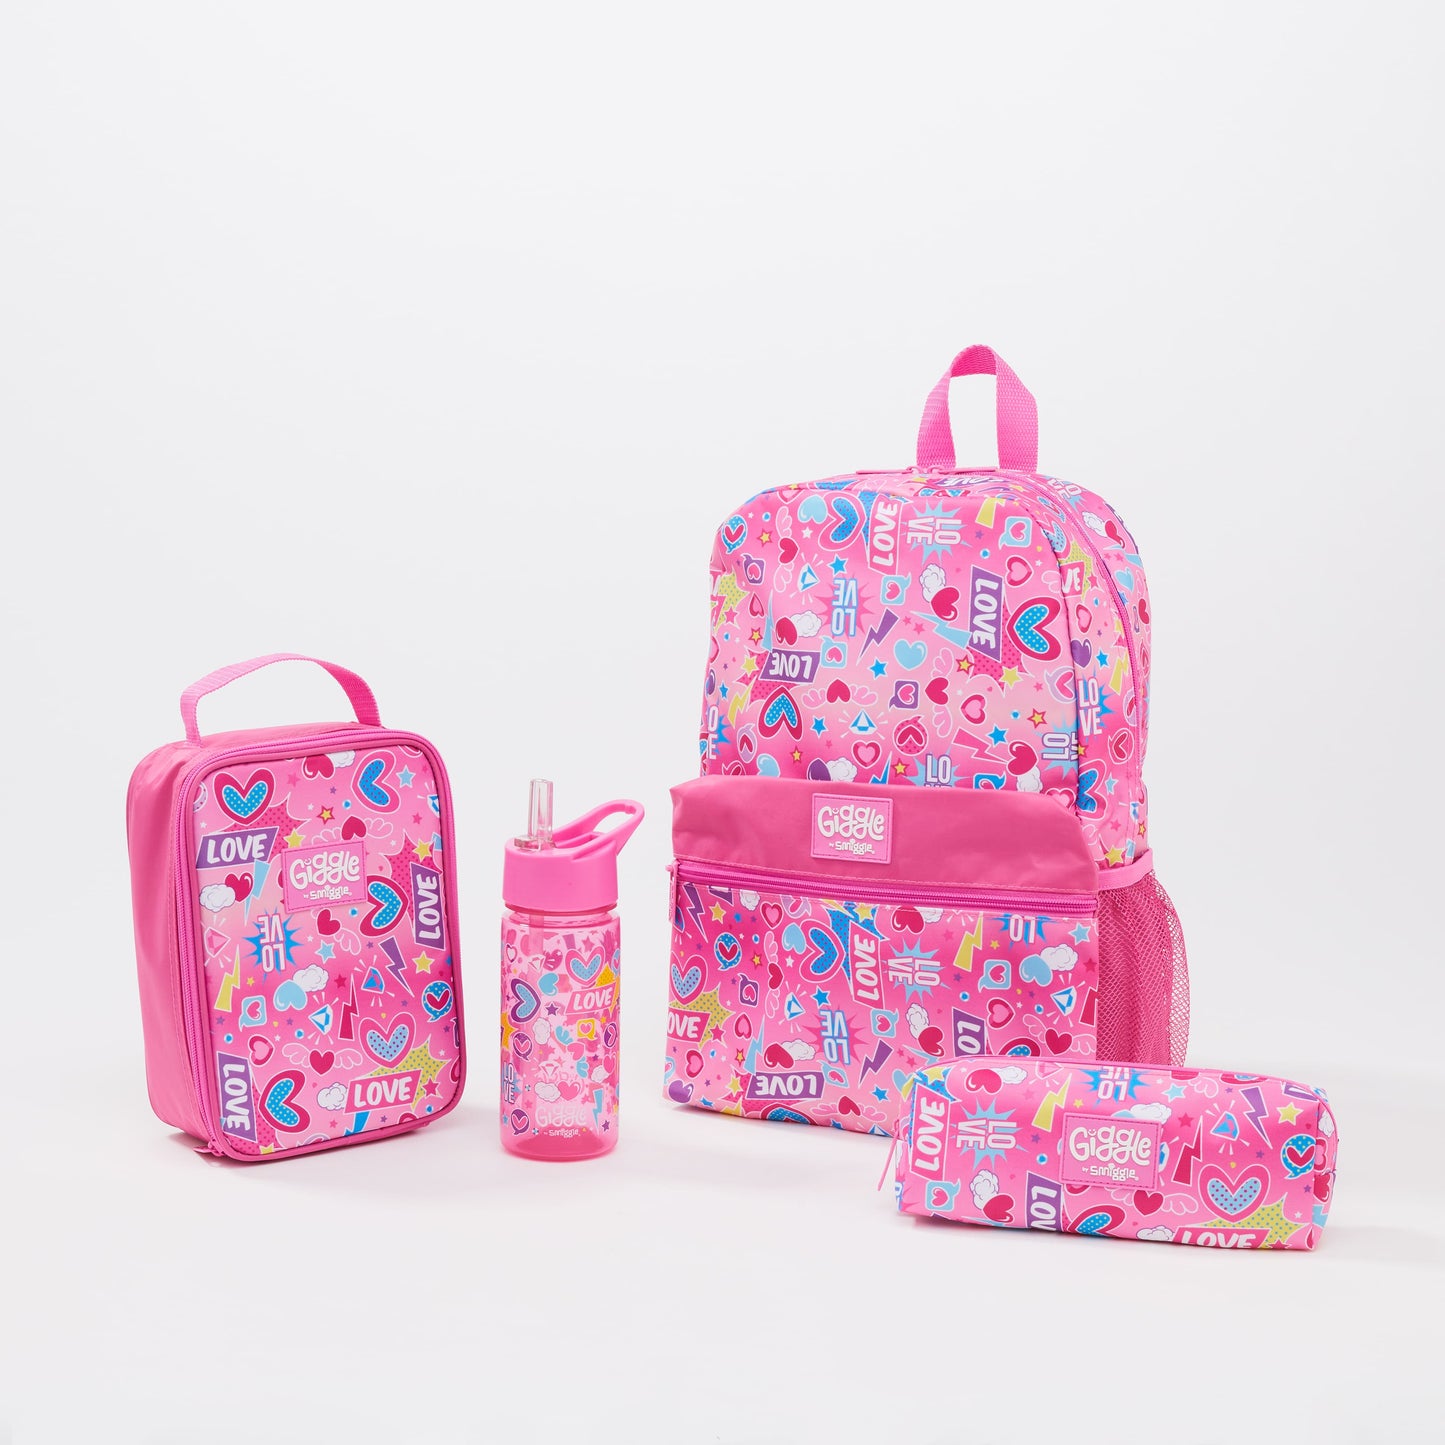 Giggle By Smiggle 4 Piece Bundle - Pink